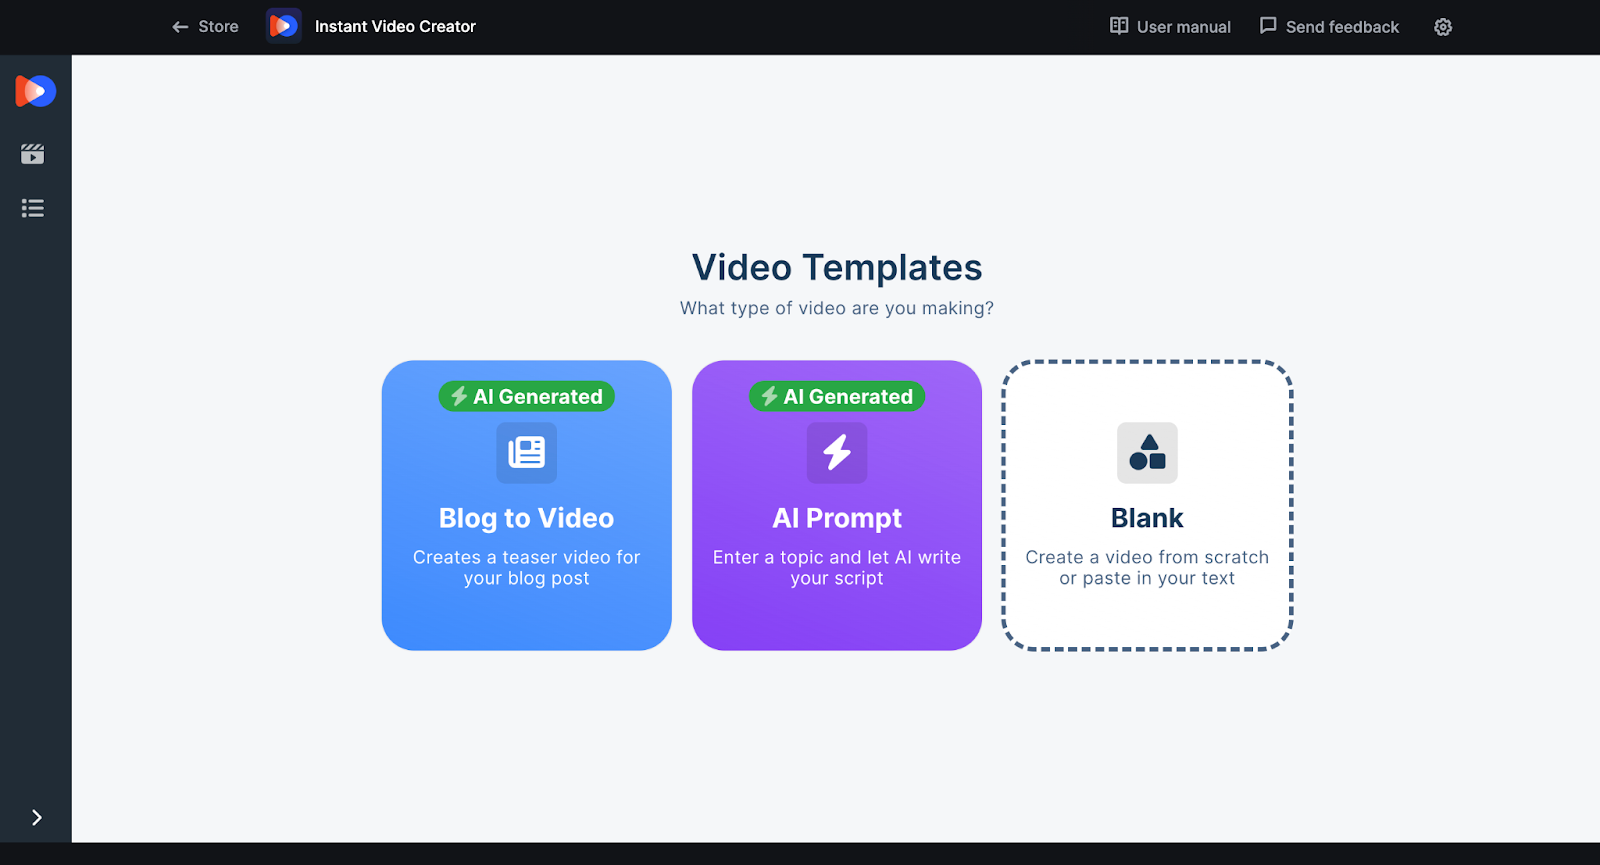 Video template options: Blog to Video, AI Prompt, and Blank.